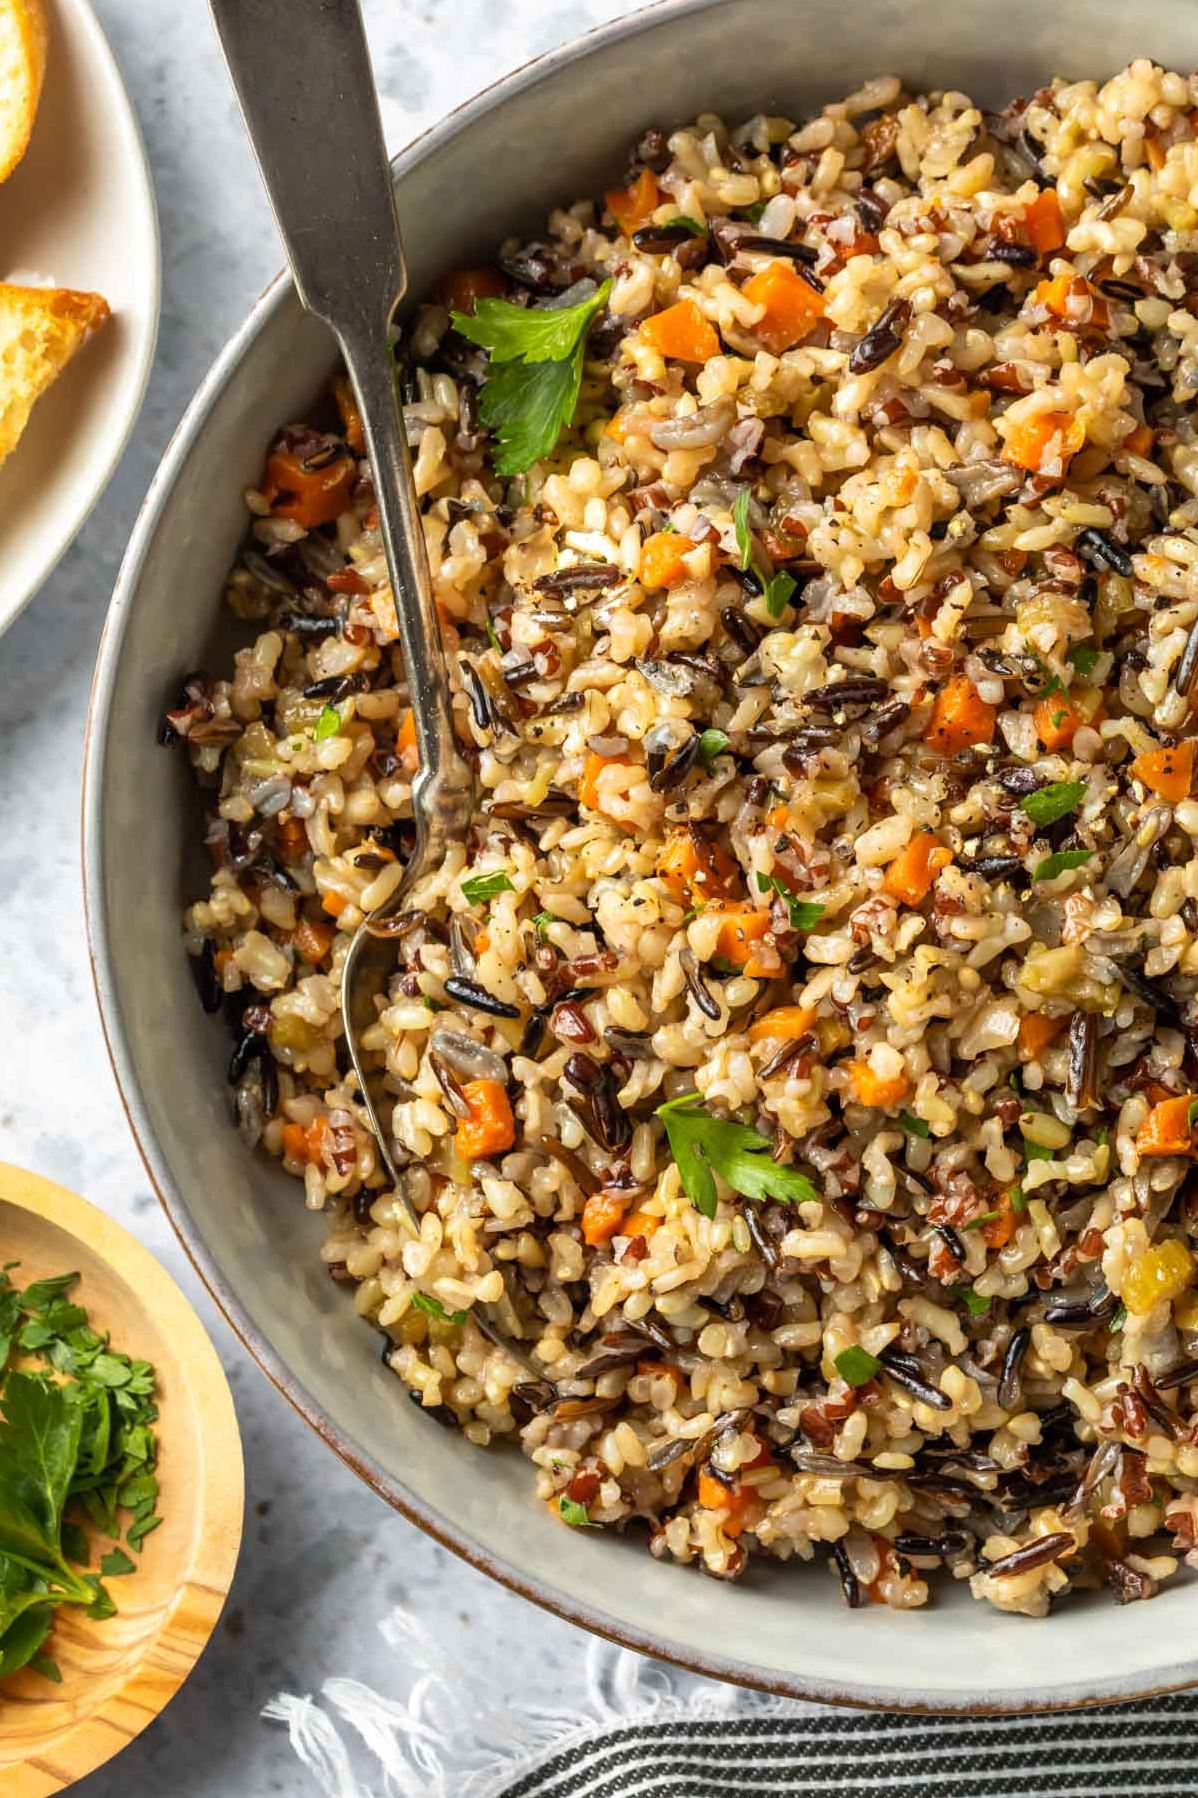  Wild rice adds a nutty flavor and unique texture to the dish.